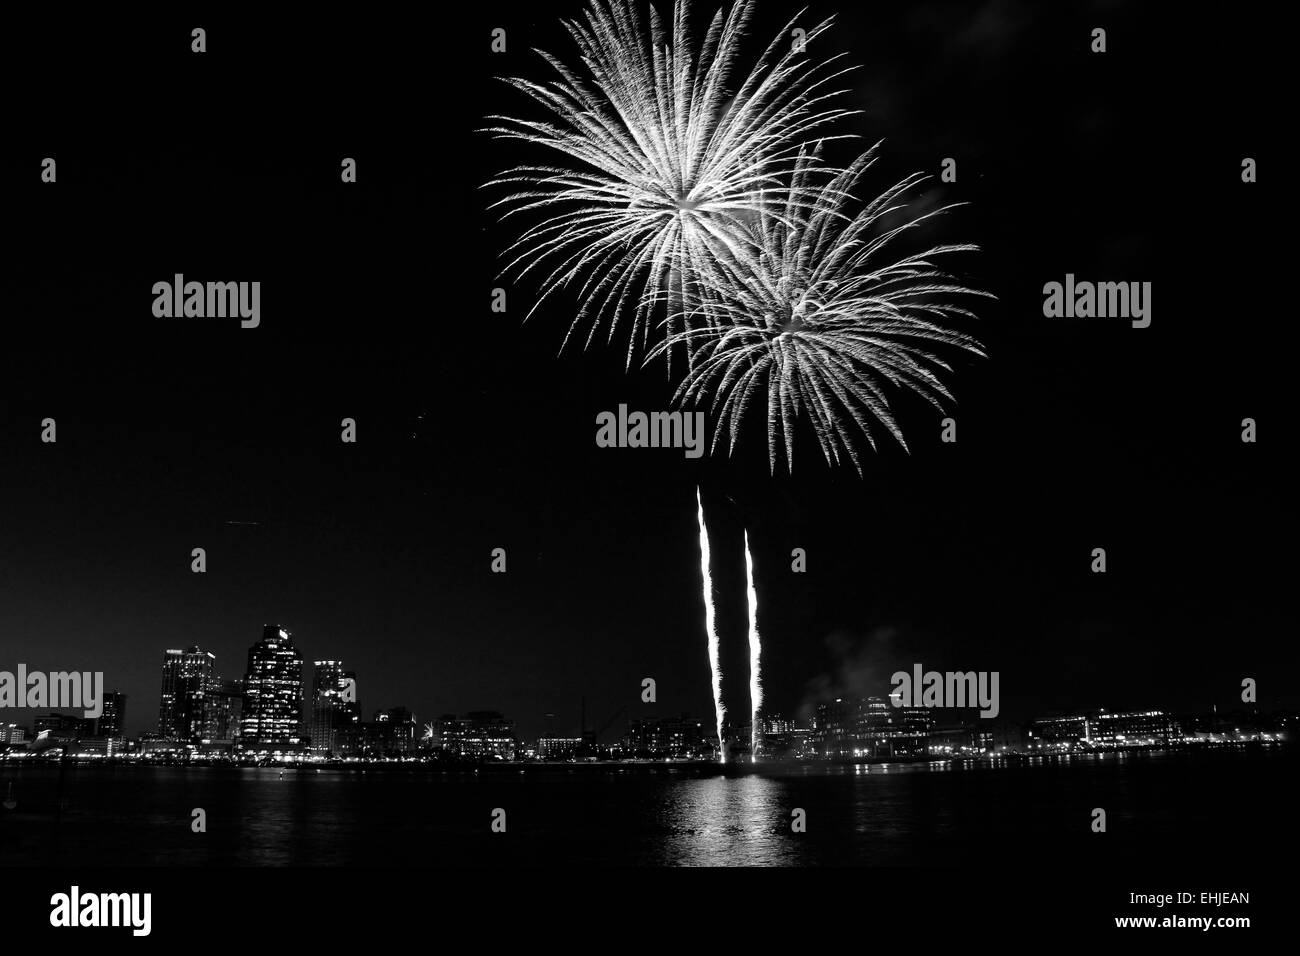 Fireworks during the 4th of July over Baltimore, Maryland Stock Photo